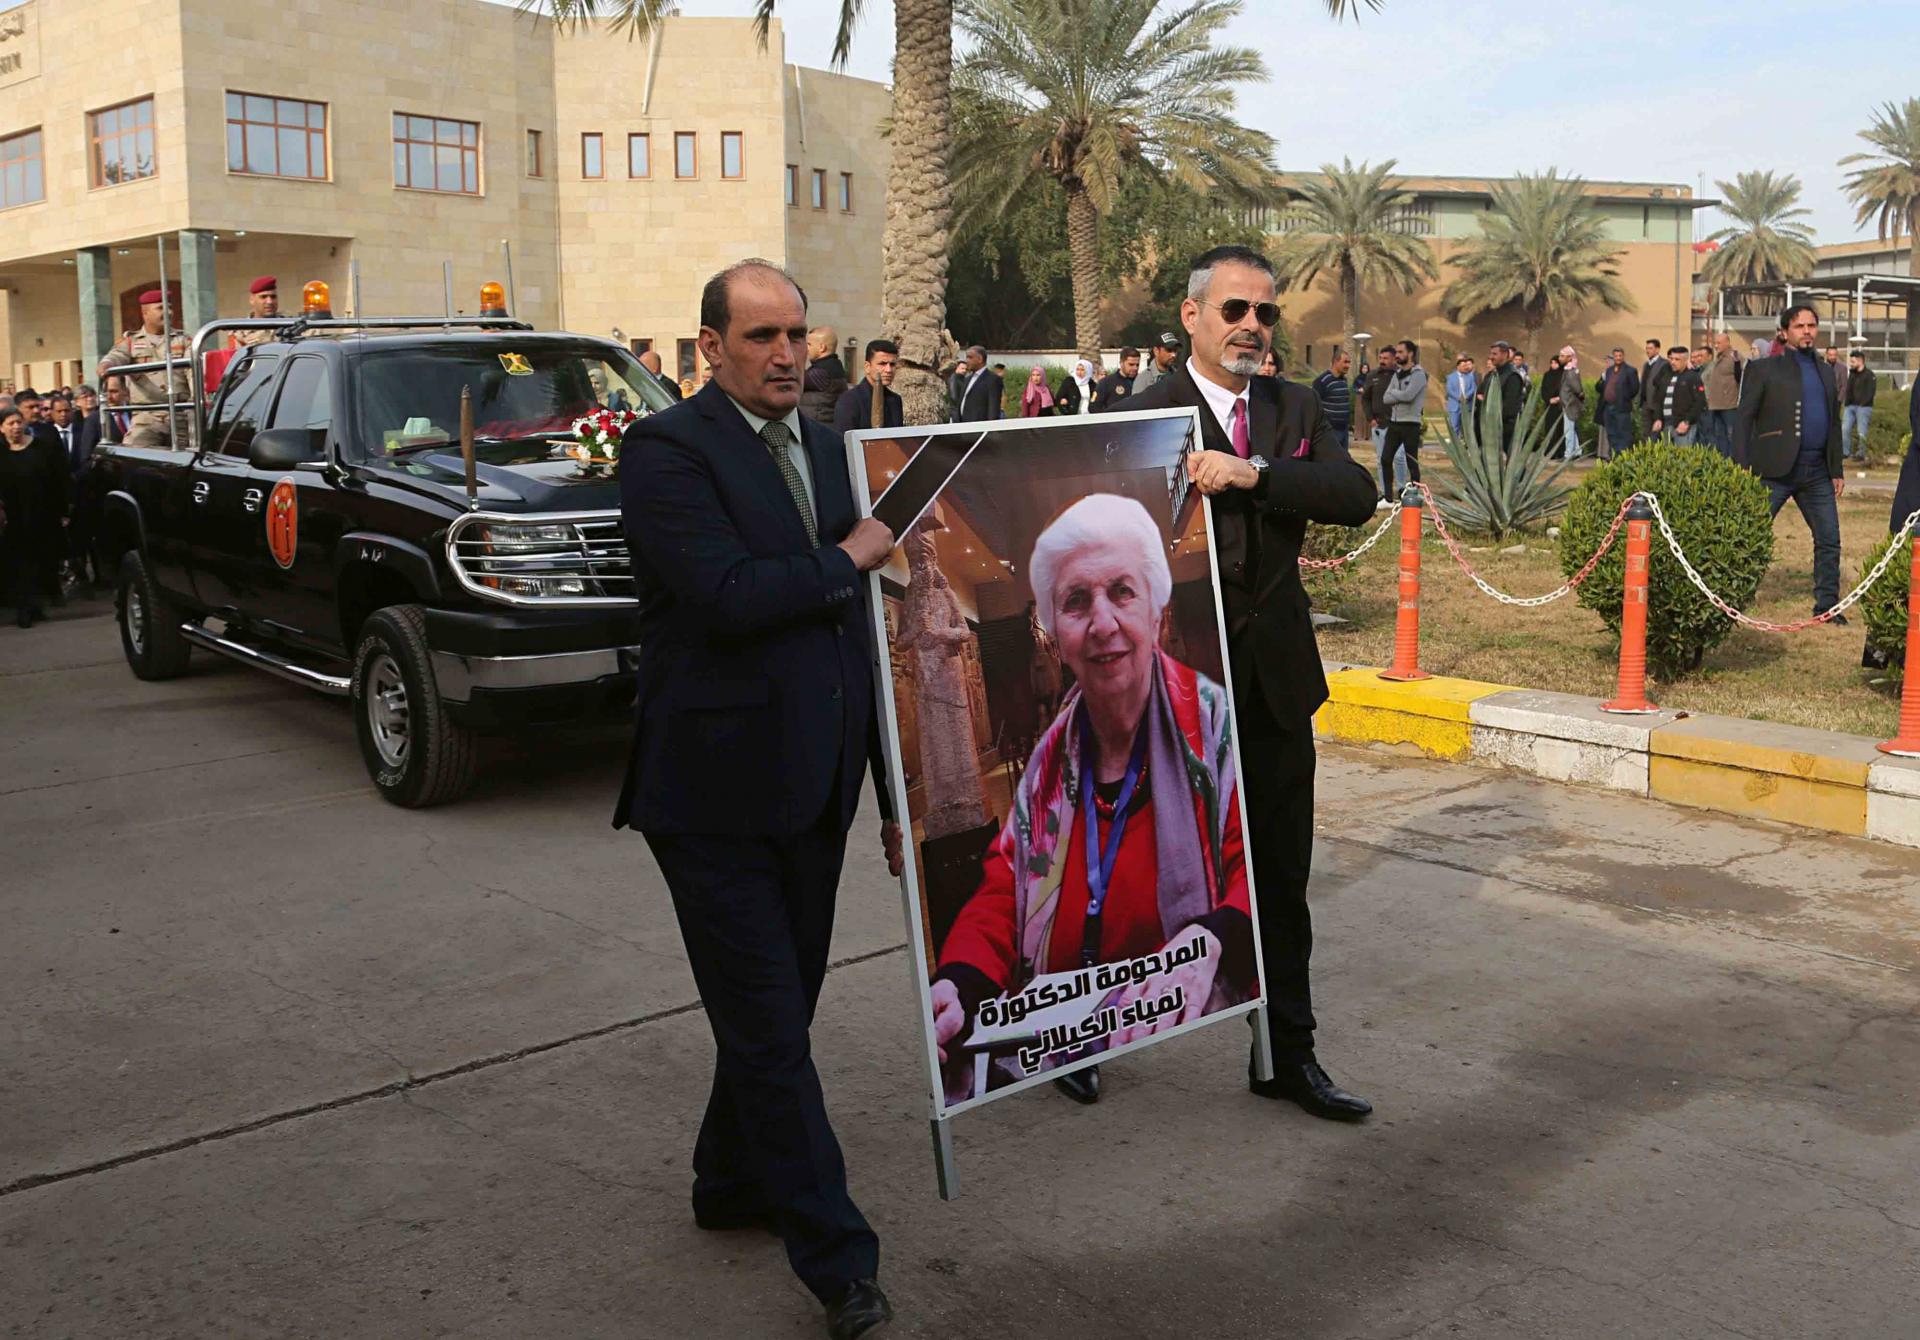 Mourners transport the flag-draped coffin of Iraqi archaeologist, Lamia al-Gailani, seen in the poster, for burial during her funeral procession in the National Museum in Baghdad, Iraq, Monday, Jan. 21, 2019